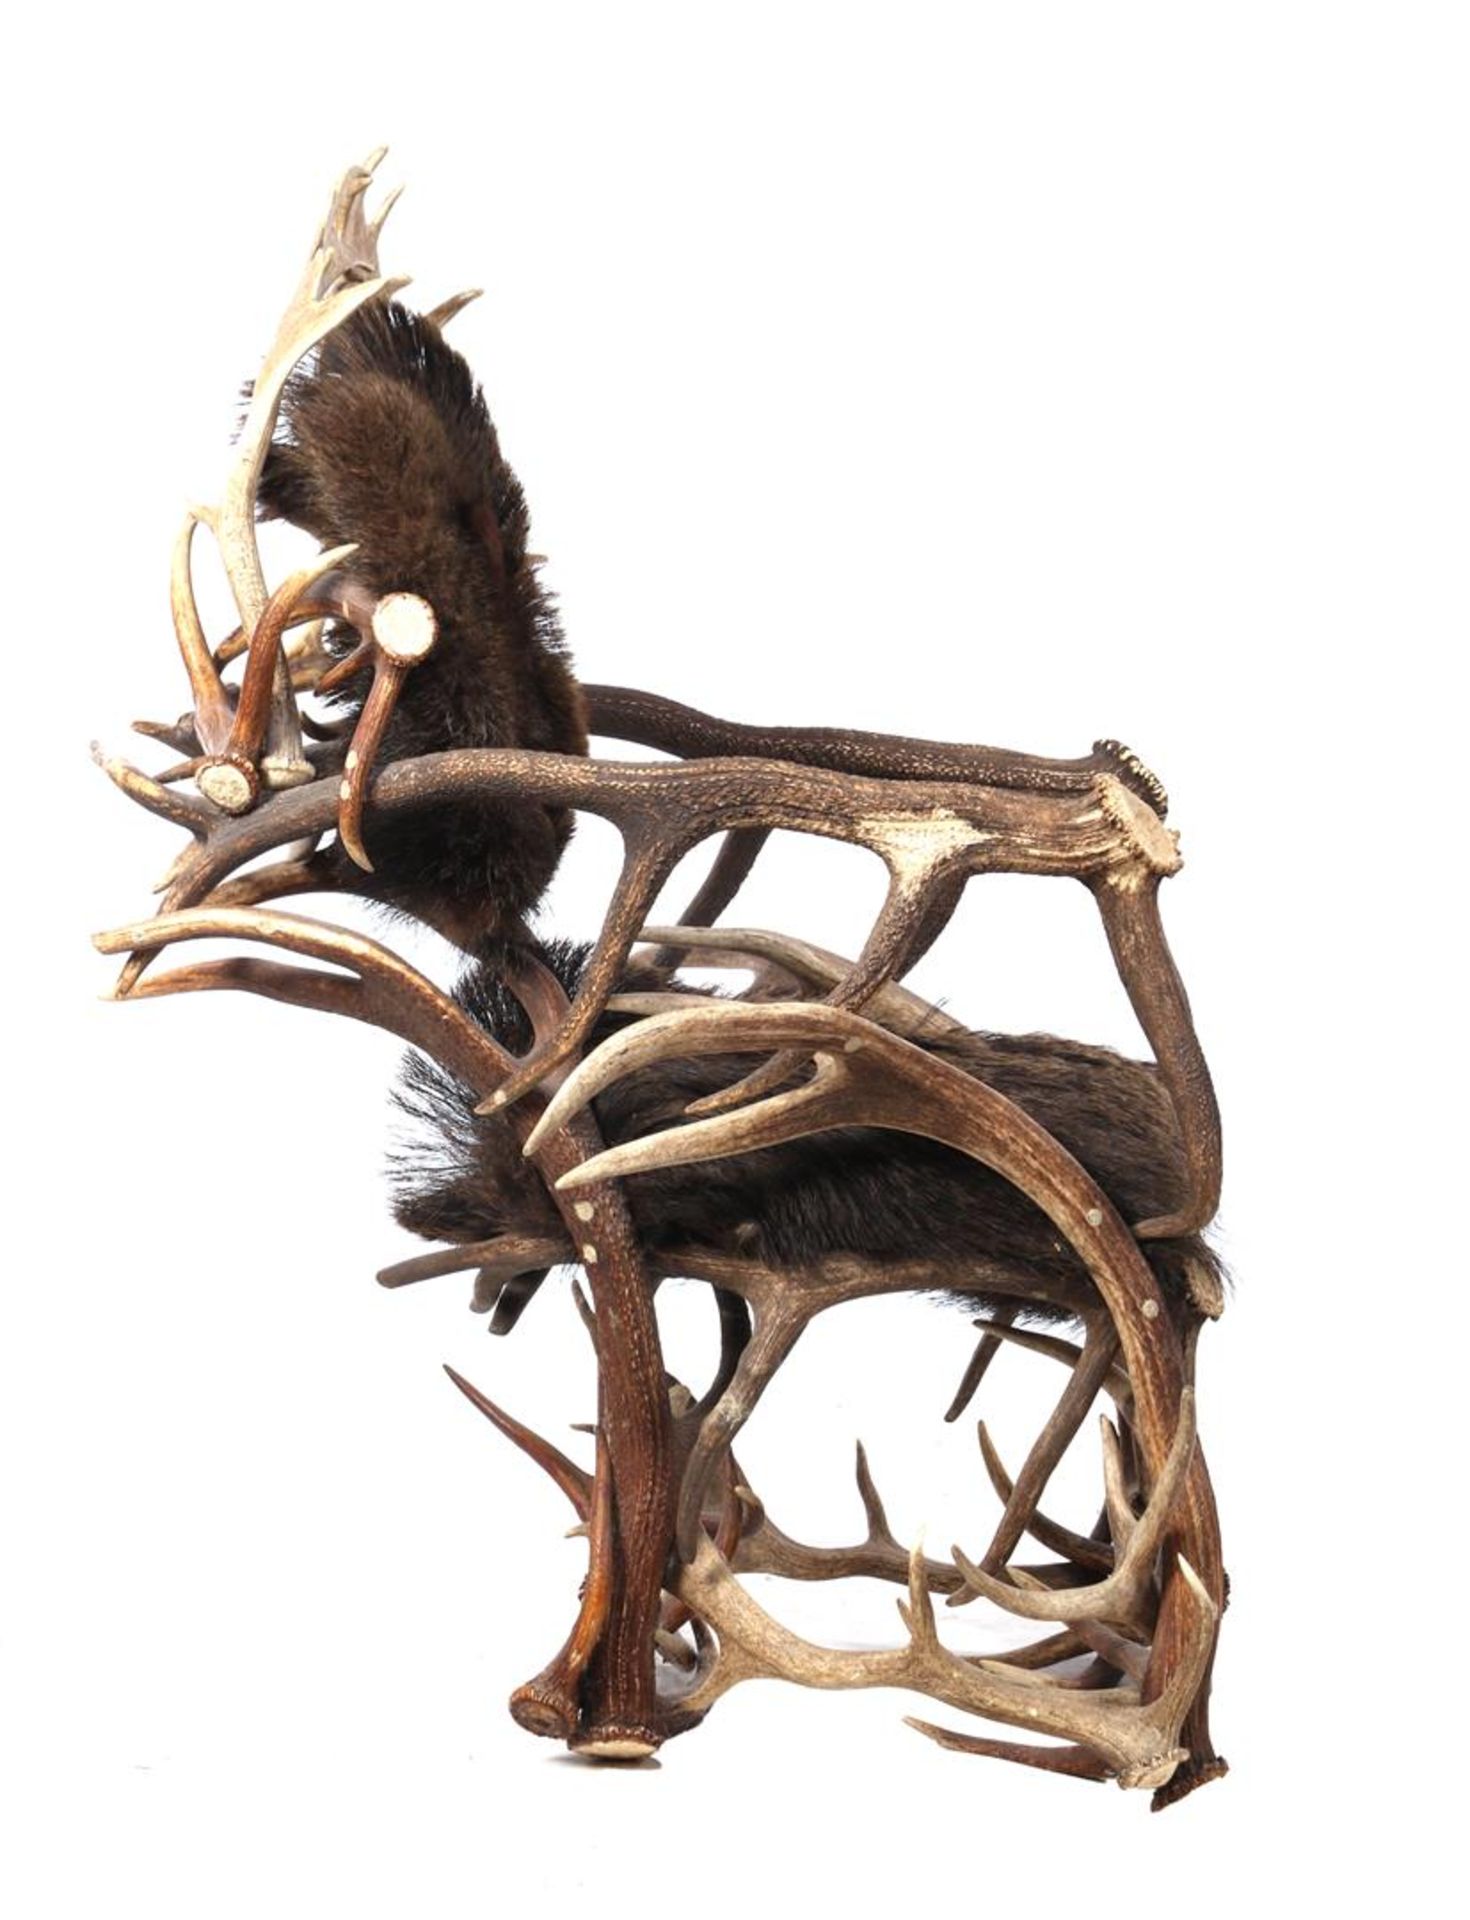 Armchair made of antlers and fur - Image 2 of 3